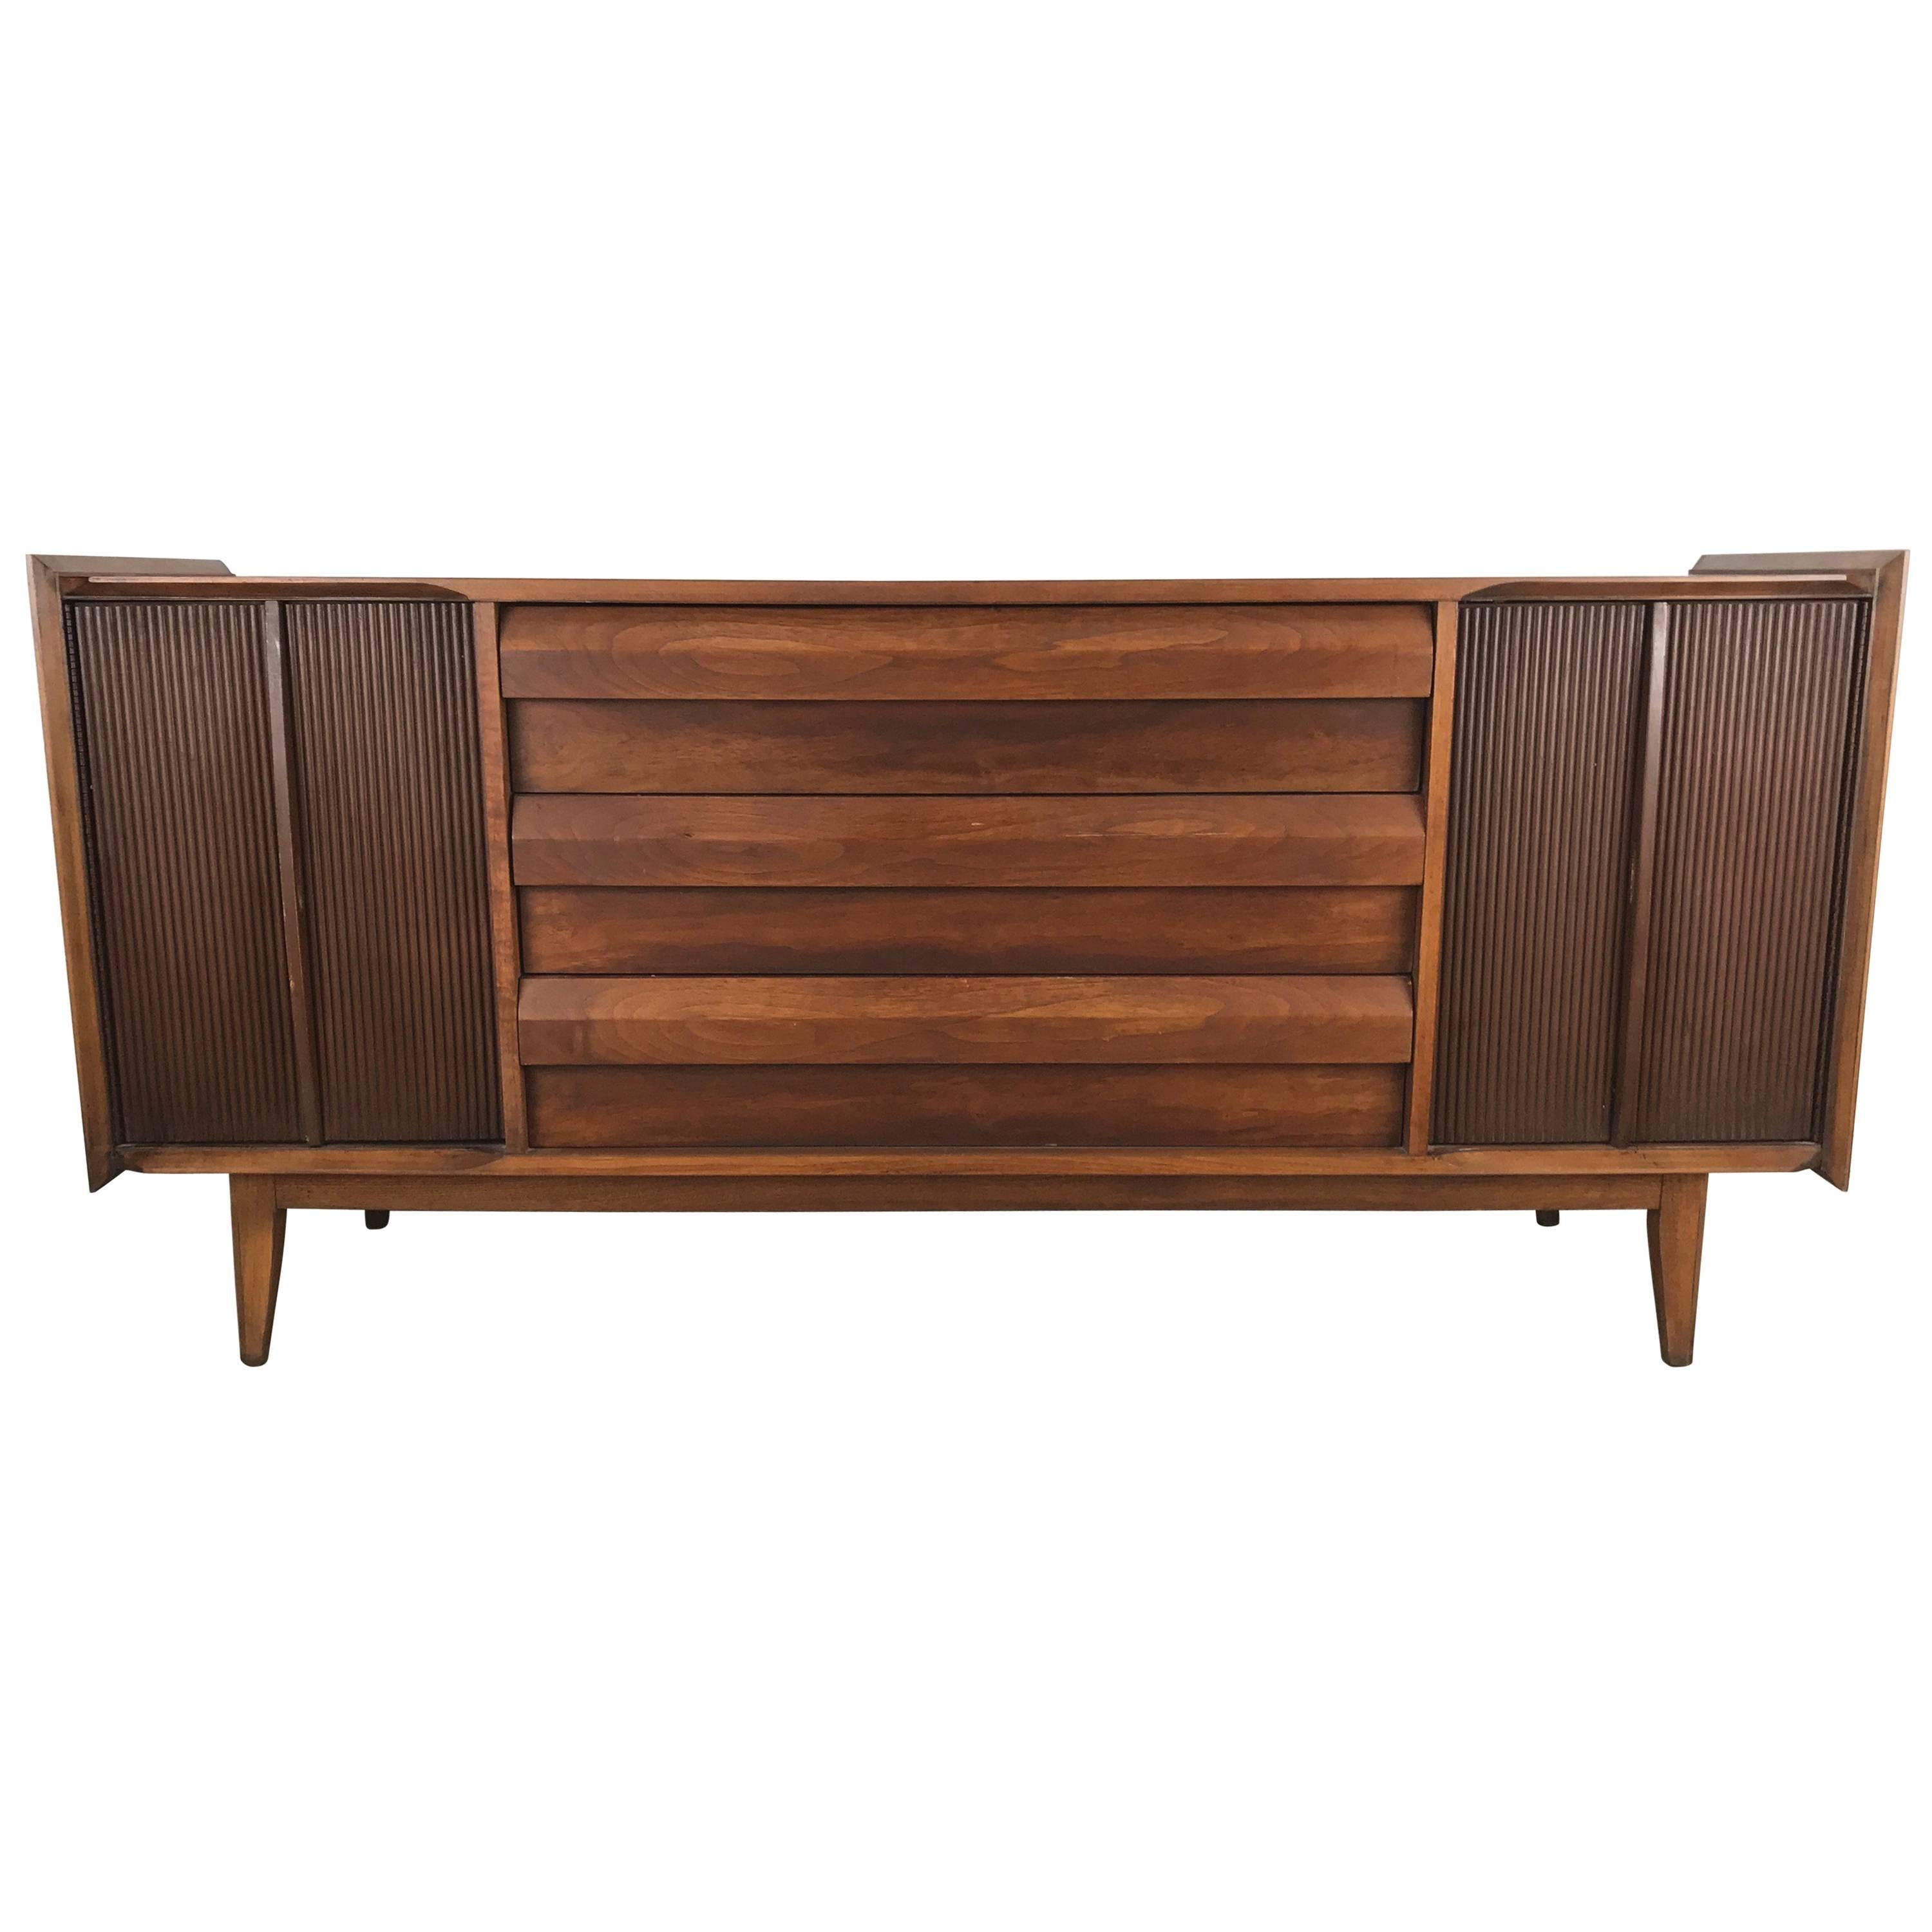 Modernist Server/Credenza, Two-Tone Walnut Finish, Made by Lane Furniture Co.